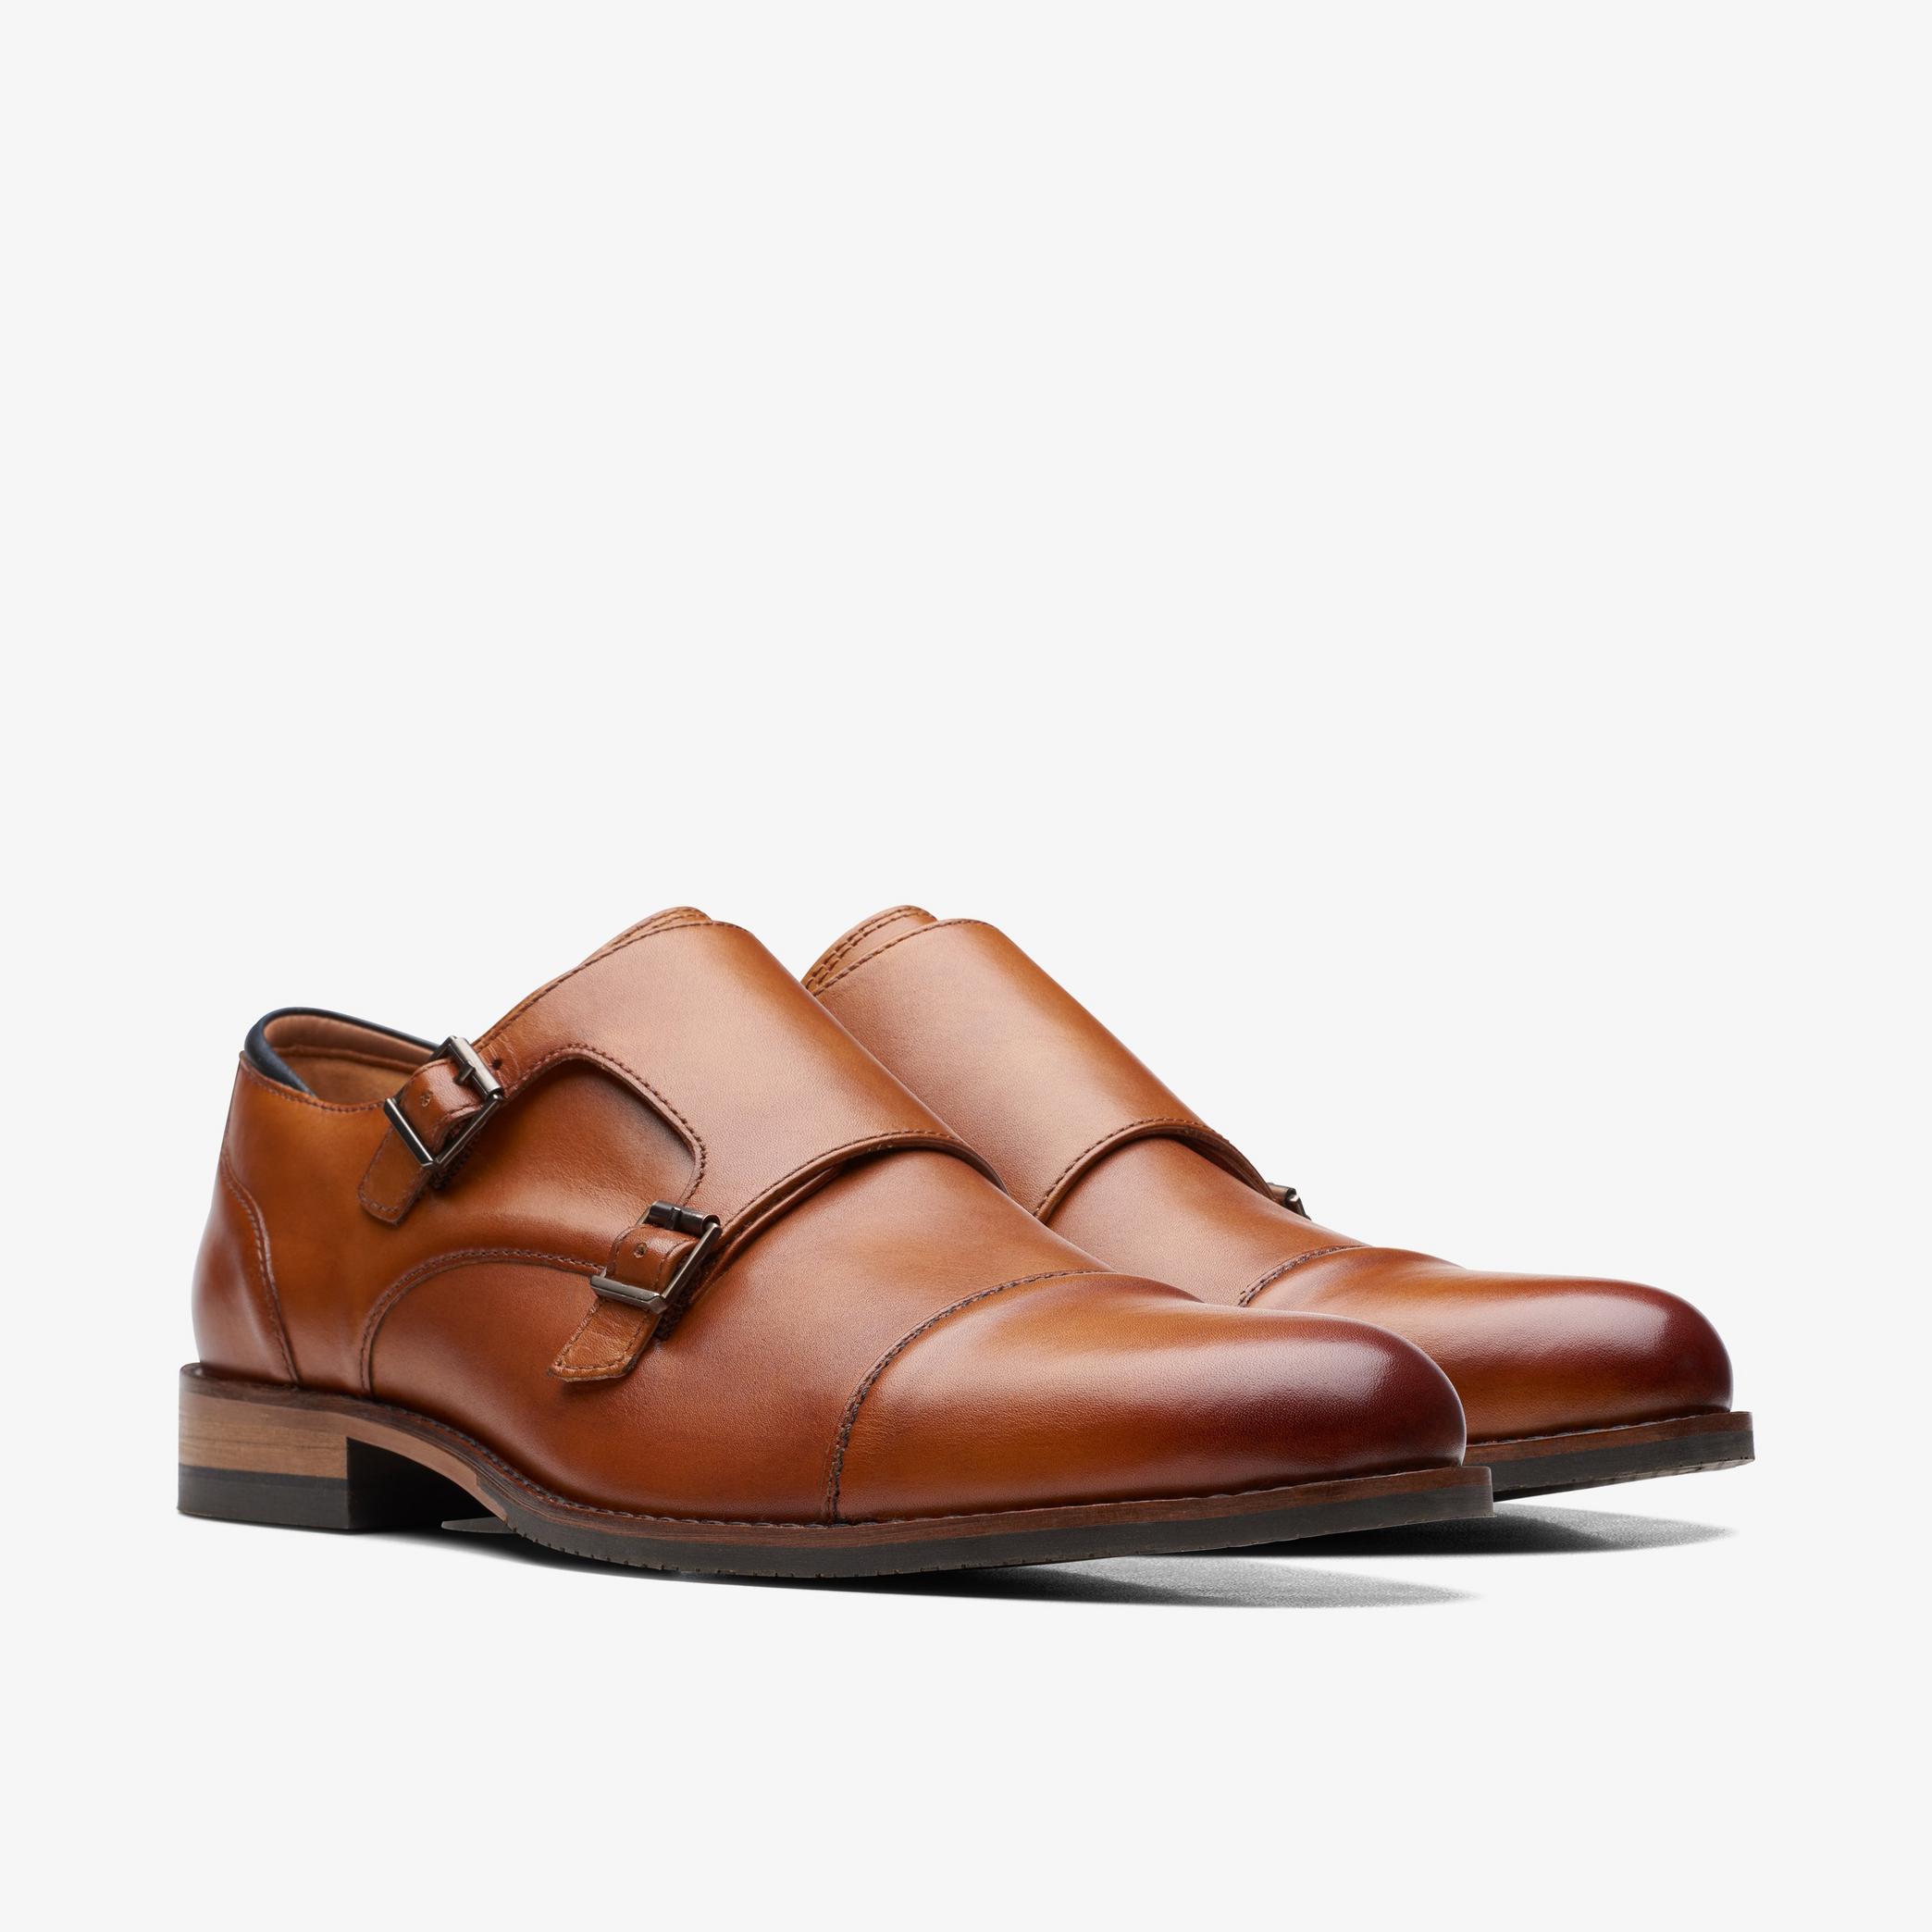 Craft Arlo Monk Tan Leather Shoes, view 4 of 6